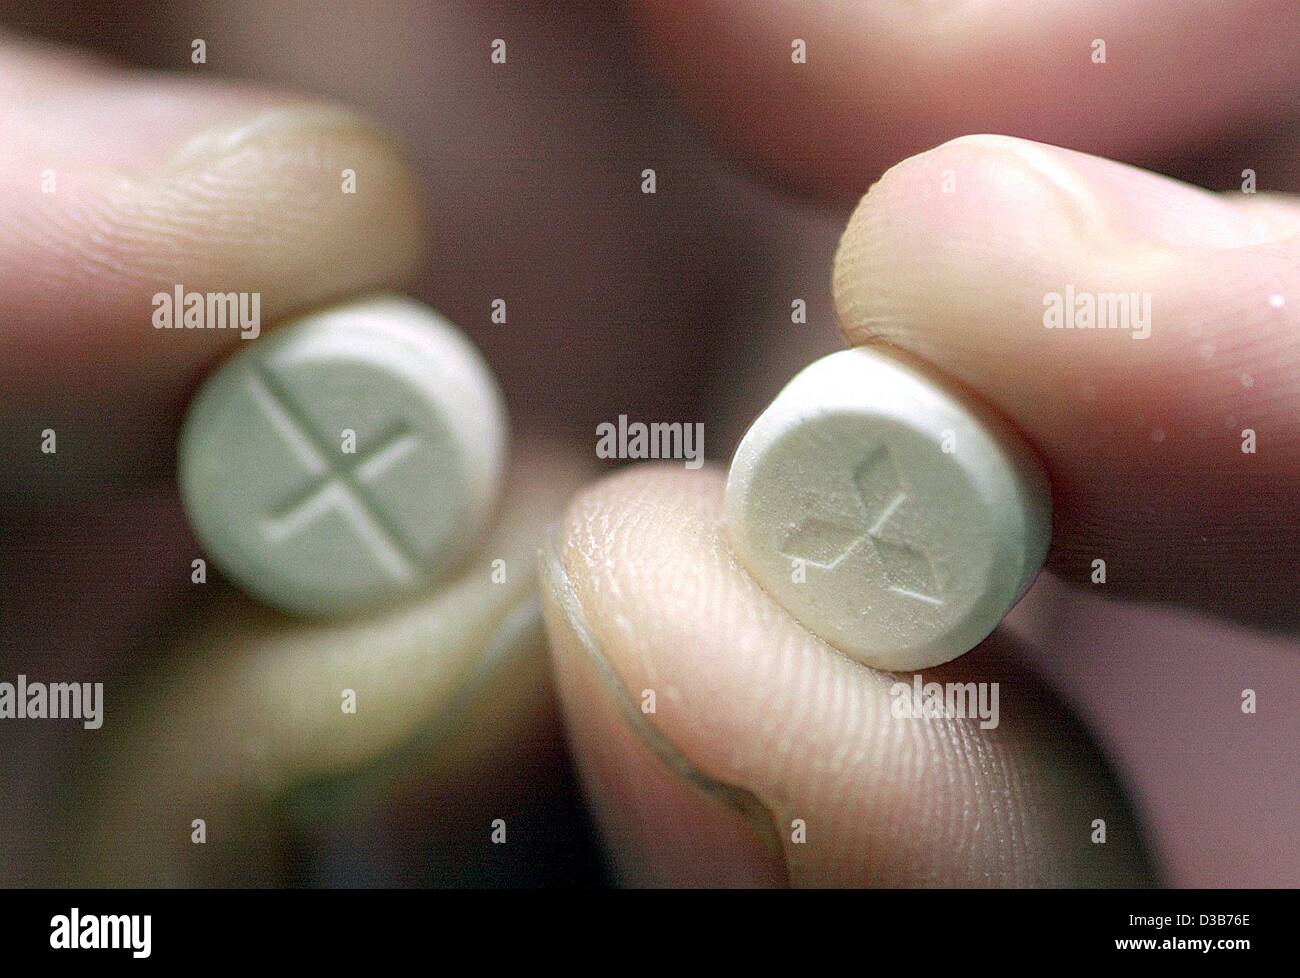 (dpa) - A police officer holds up two ecstasy pills in the police department in Frankfurt, 23 December 2002. Stock Photo